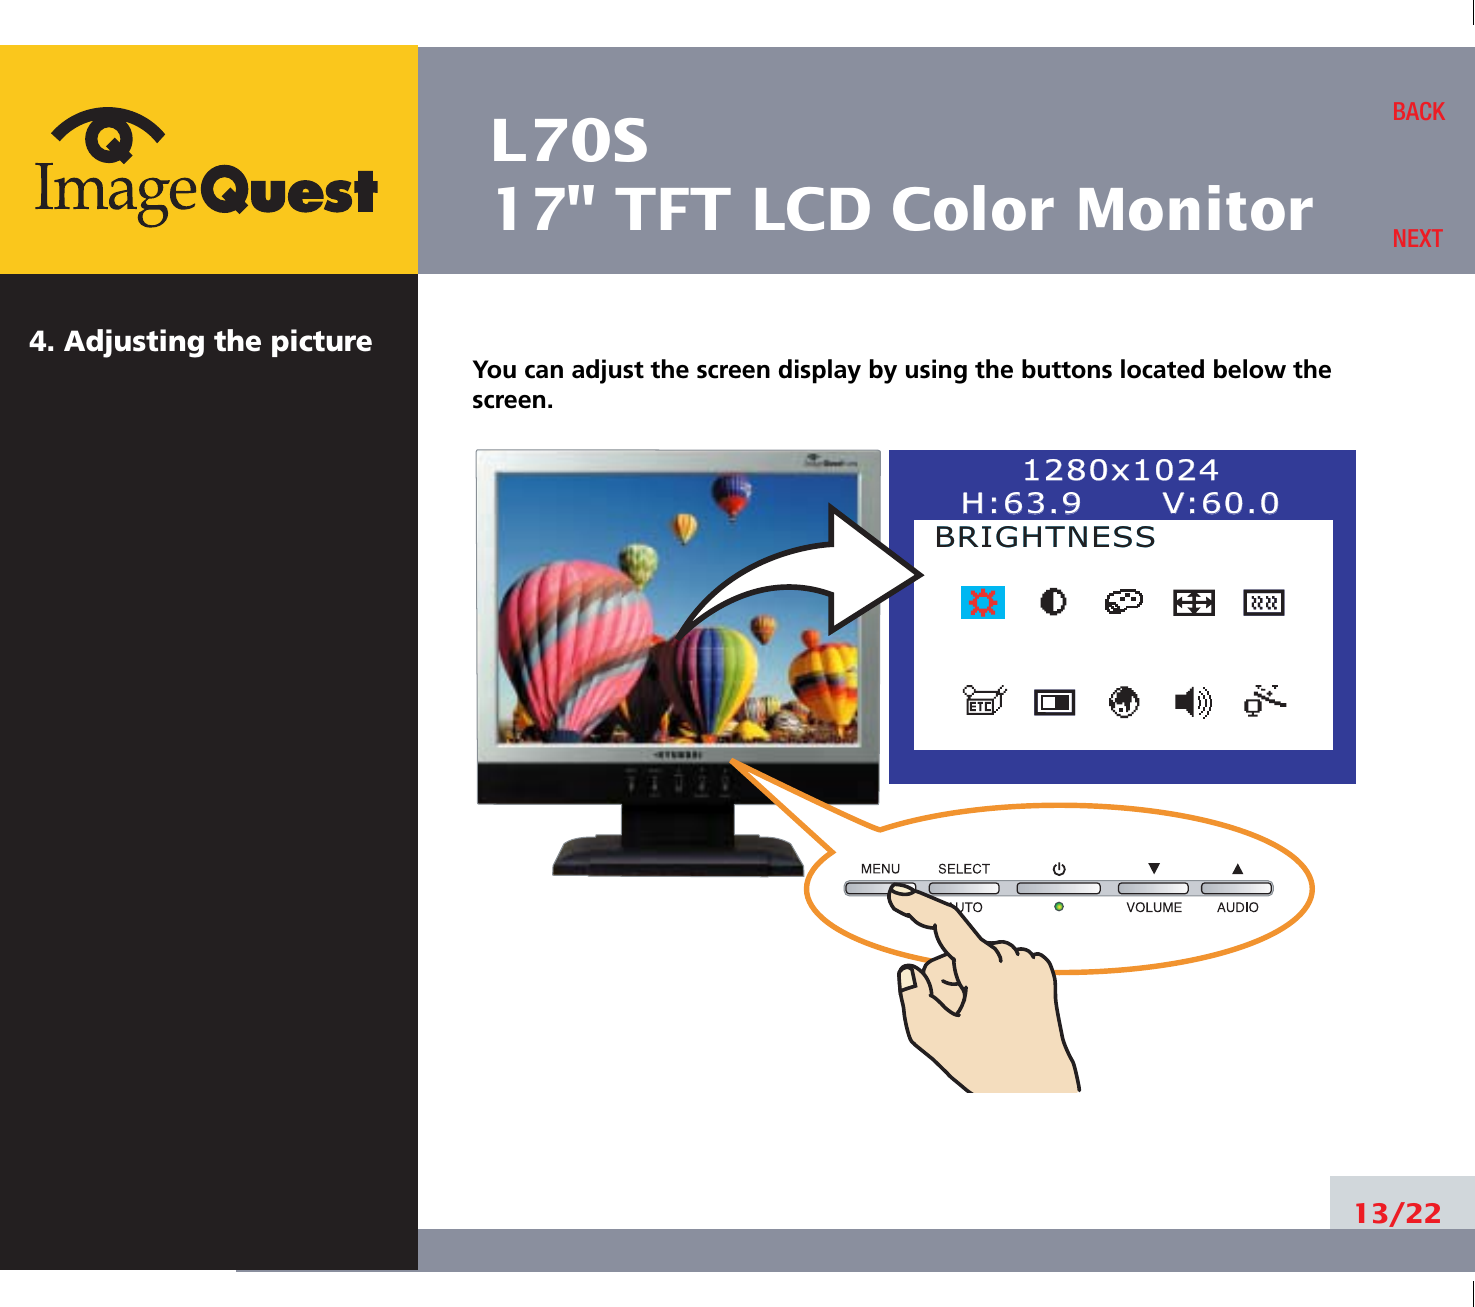 L70S17&quot; TFT LCD Color Monitor4. Adjusting the picture13/22BACKNEXTYou can adjust the screen display by using the buttons located below thescreen.1280x10241280x1024H:63.9      VH:63.9      V:60.0:60.0BRIGHTNESSBRIGHTNESS